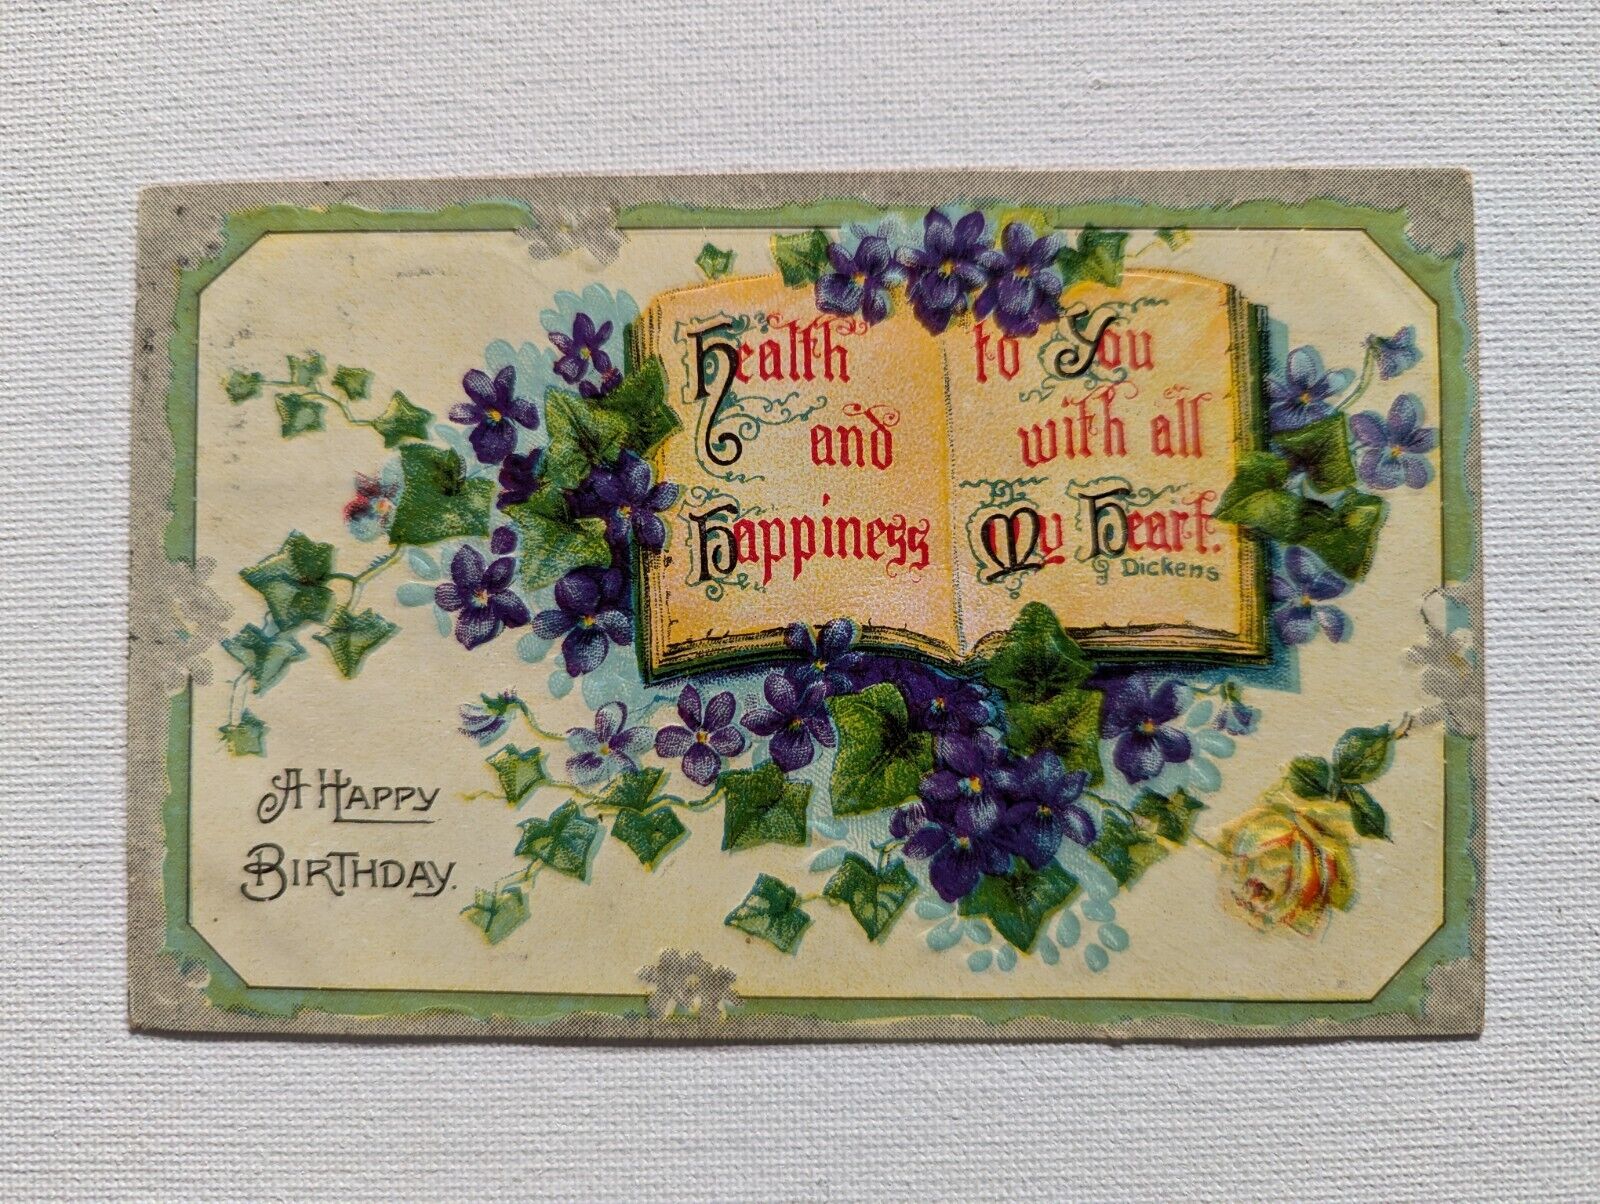 Birthday Greetings 1910 Postcard Health And Happiness To You... Violets, Ivy